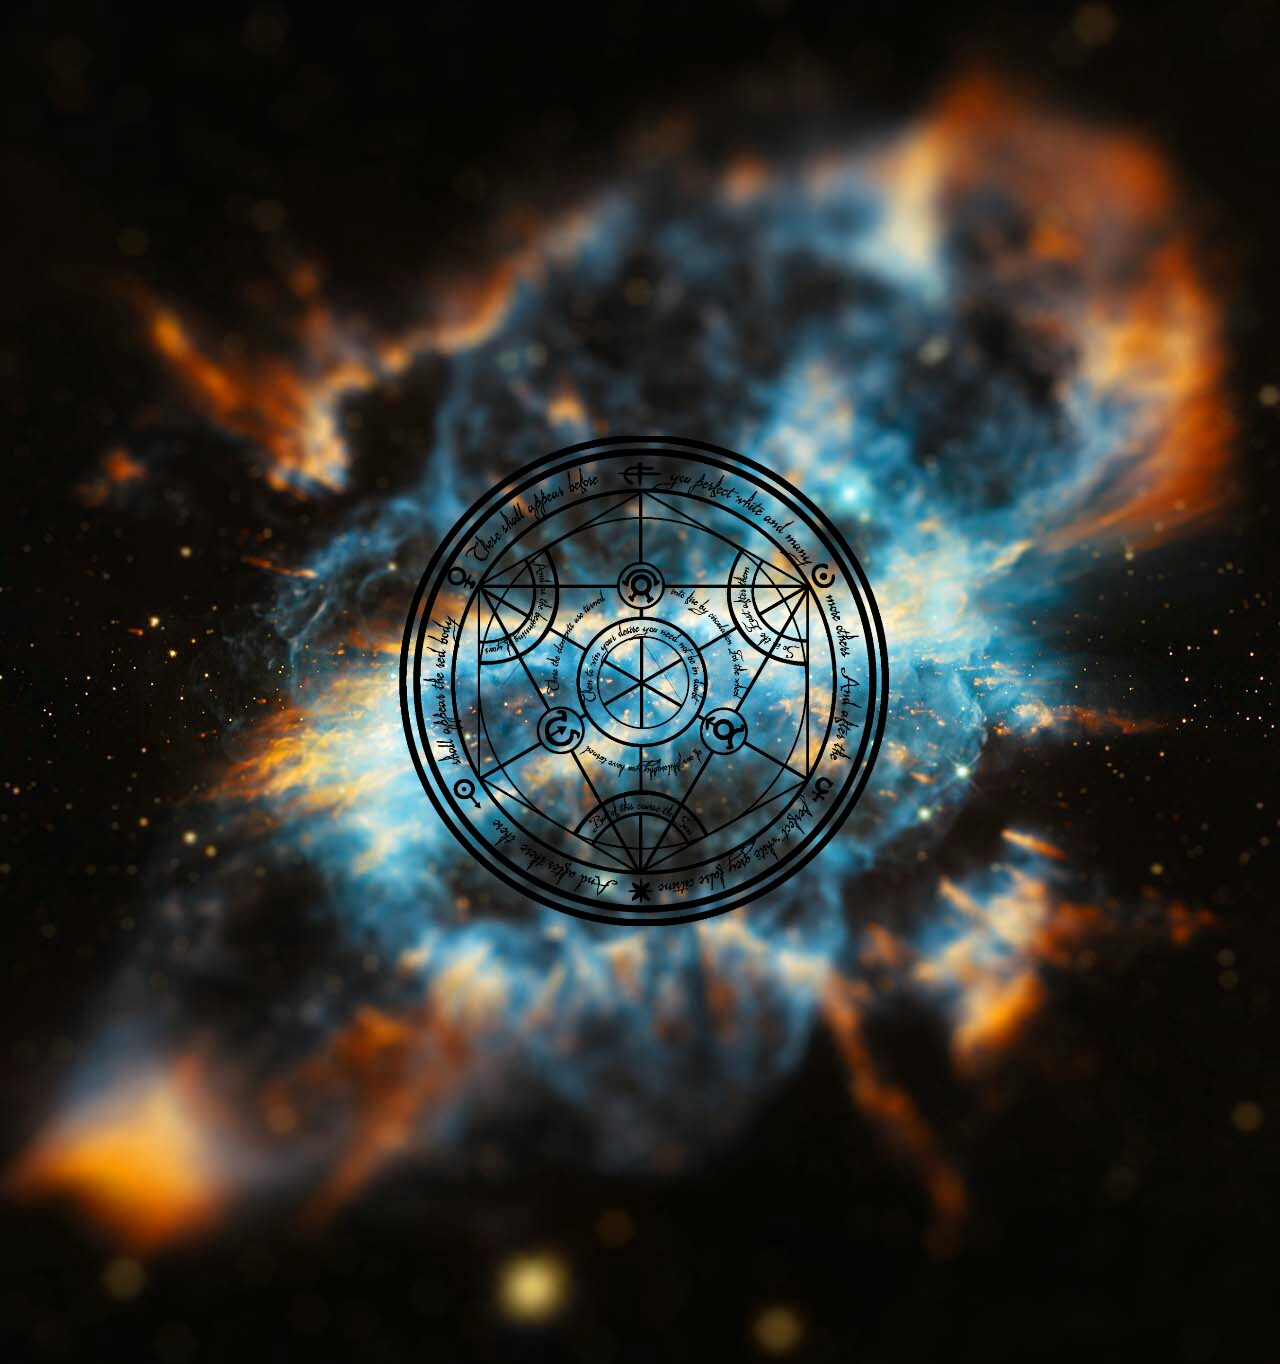 Took A Tilt Shifted Galaxy And Put Transmutation Circle In It